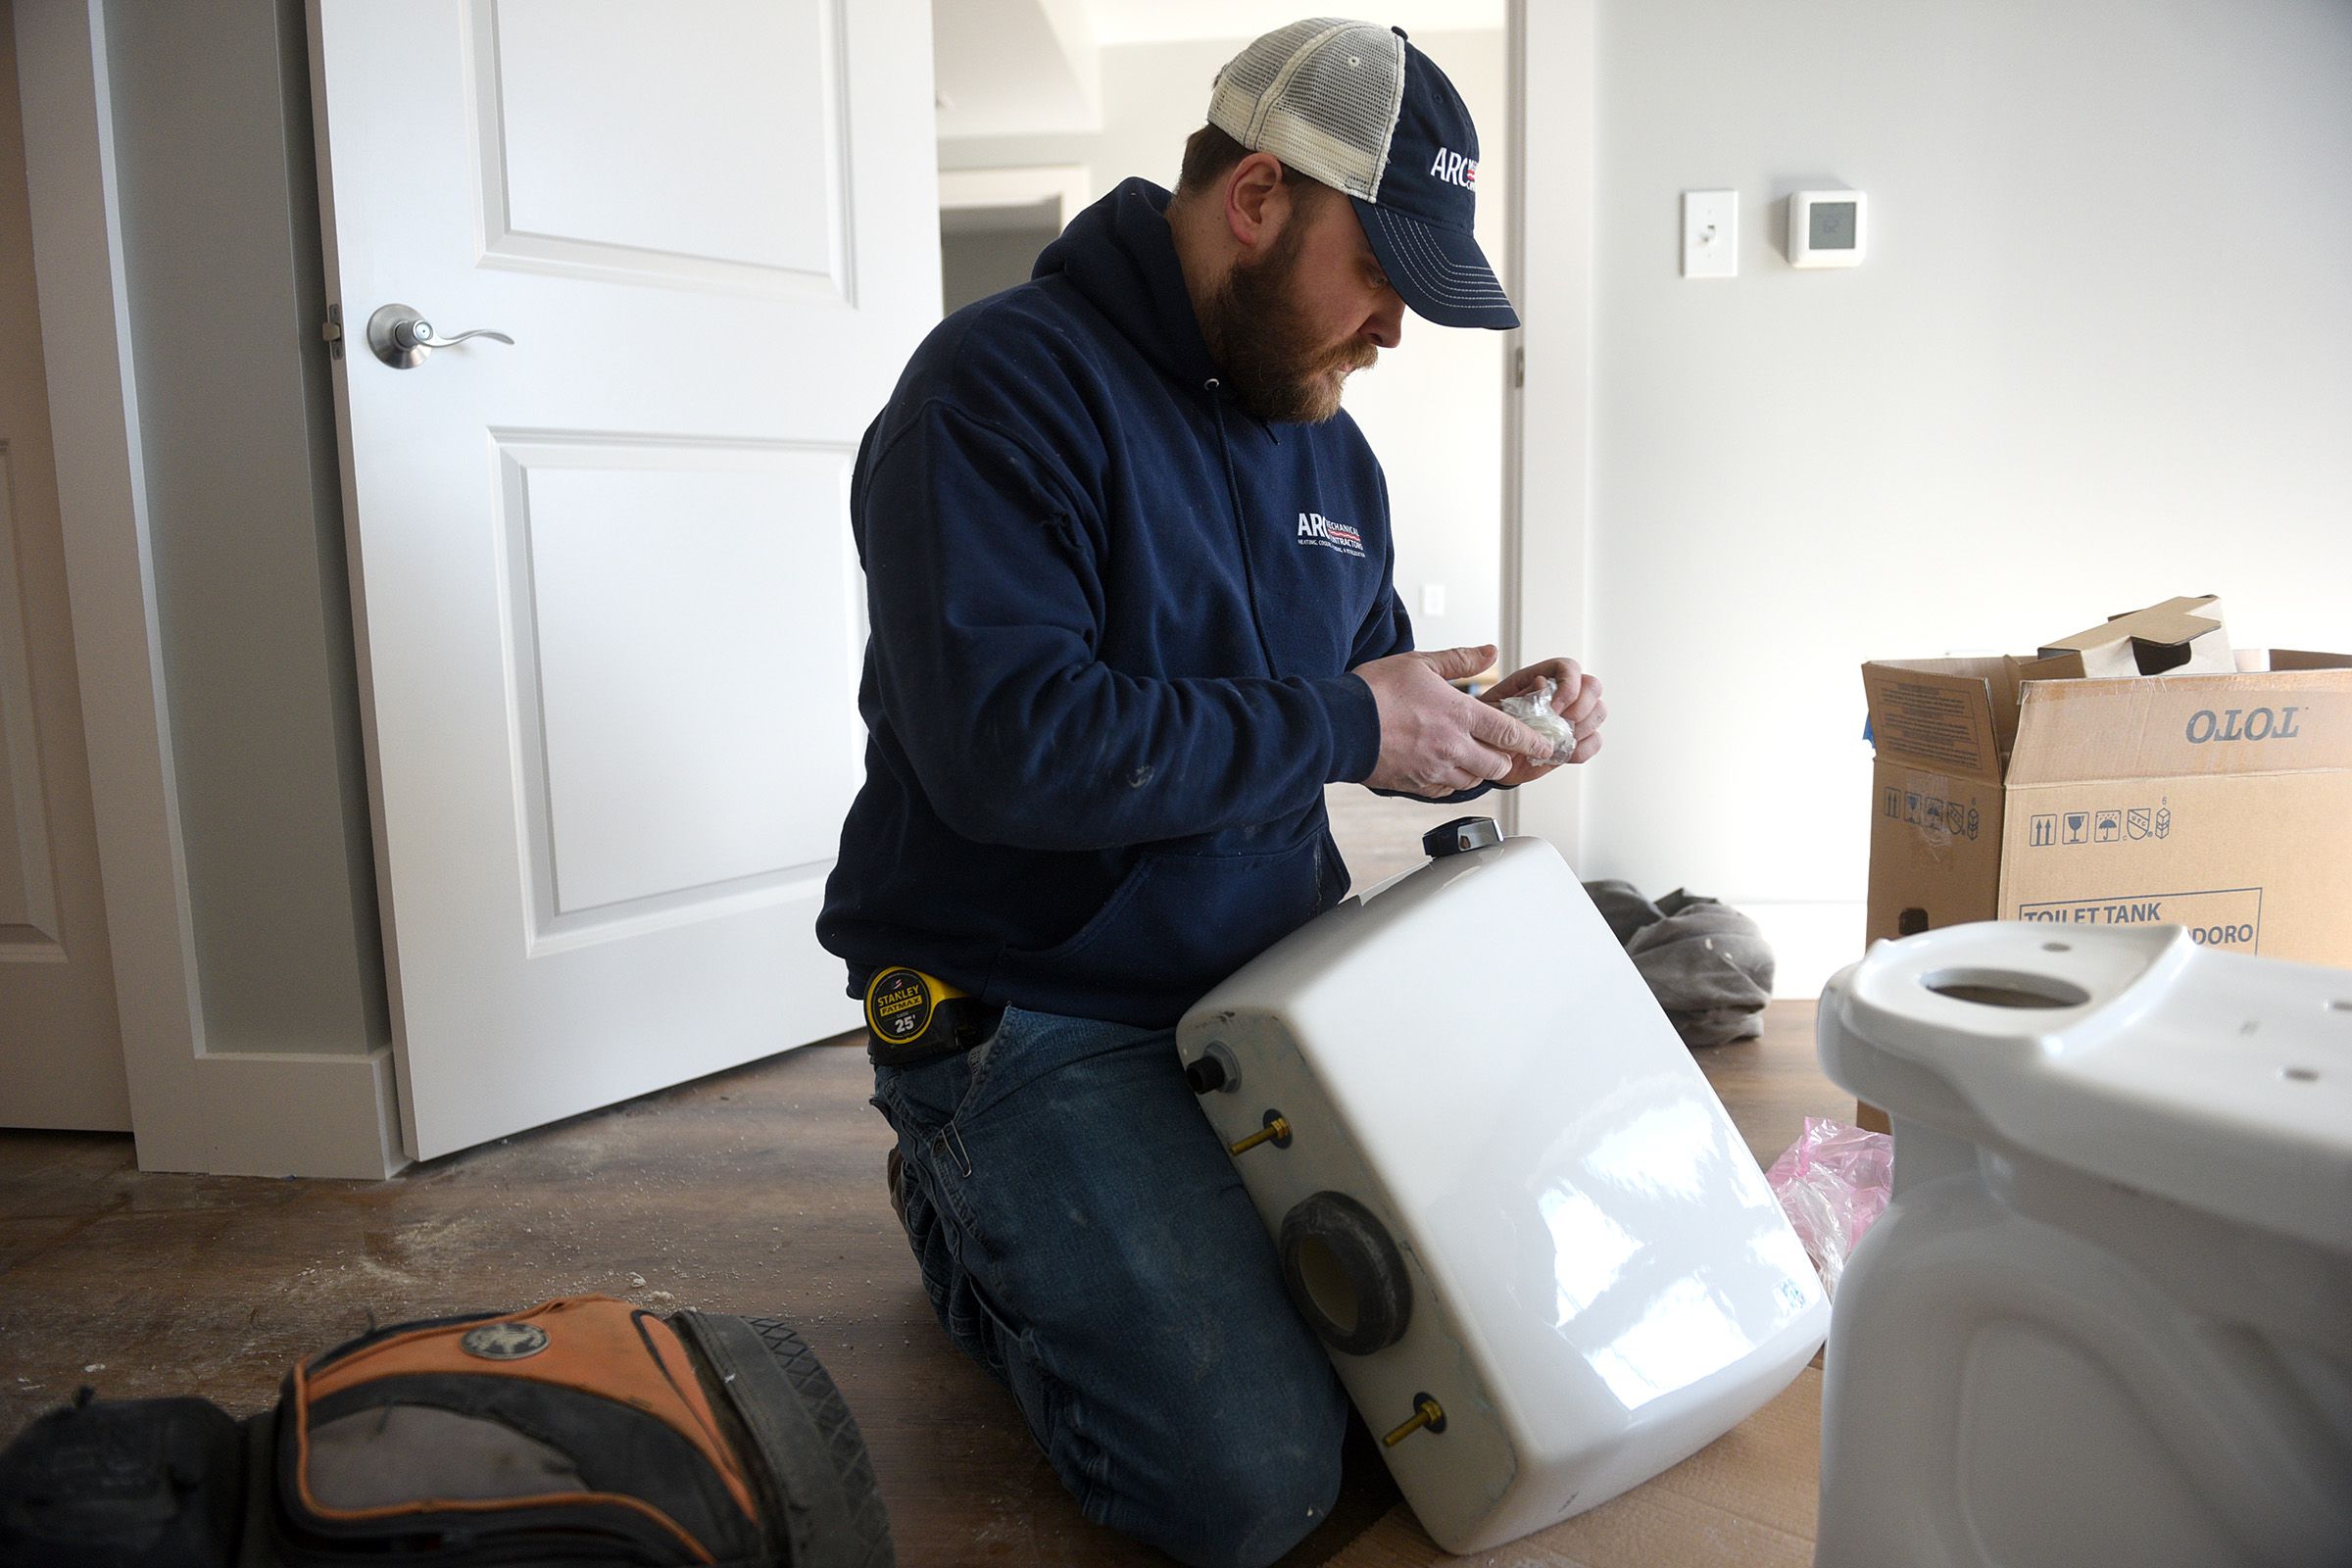 Marc Tetreault works on installing a toilet in Lebanon, N.H. on Wednesday, March 30, 2022. Tetreault is a third year plumbing apprentice at ARC Mechanical Contractors. (Valley News - Jennifer Hauck) Copyright Valley News. May not be reprinted or used online without permission. Send requests to permission@vnews.com.